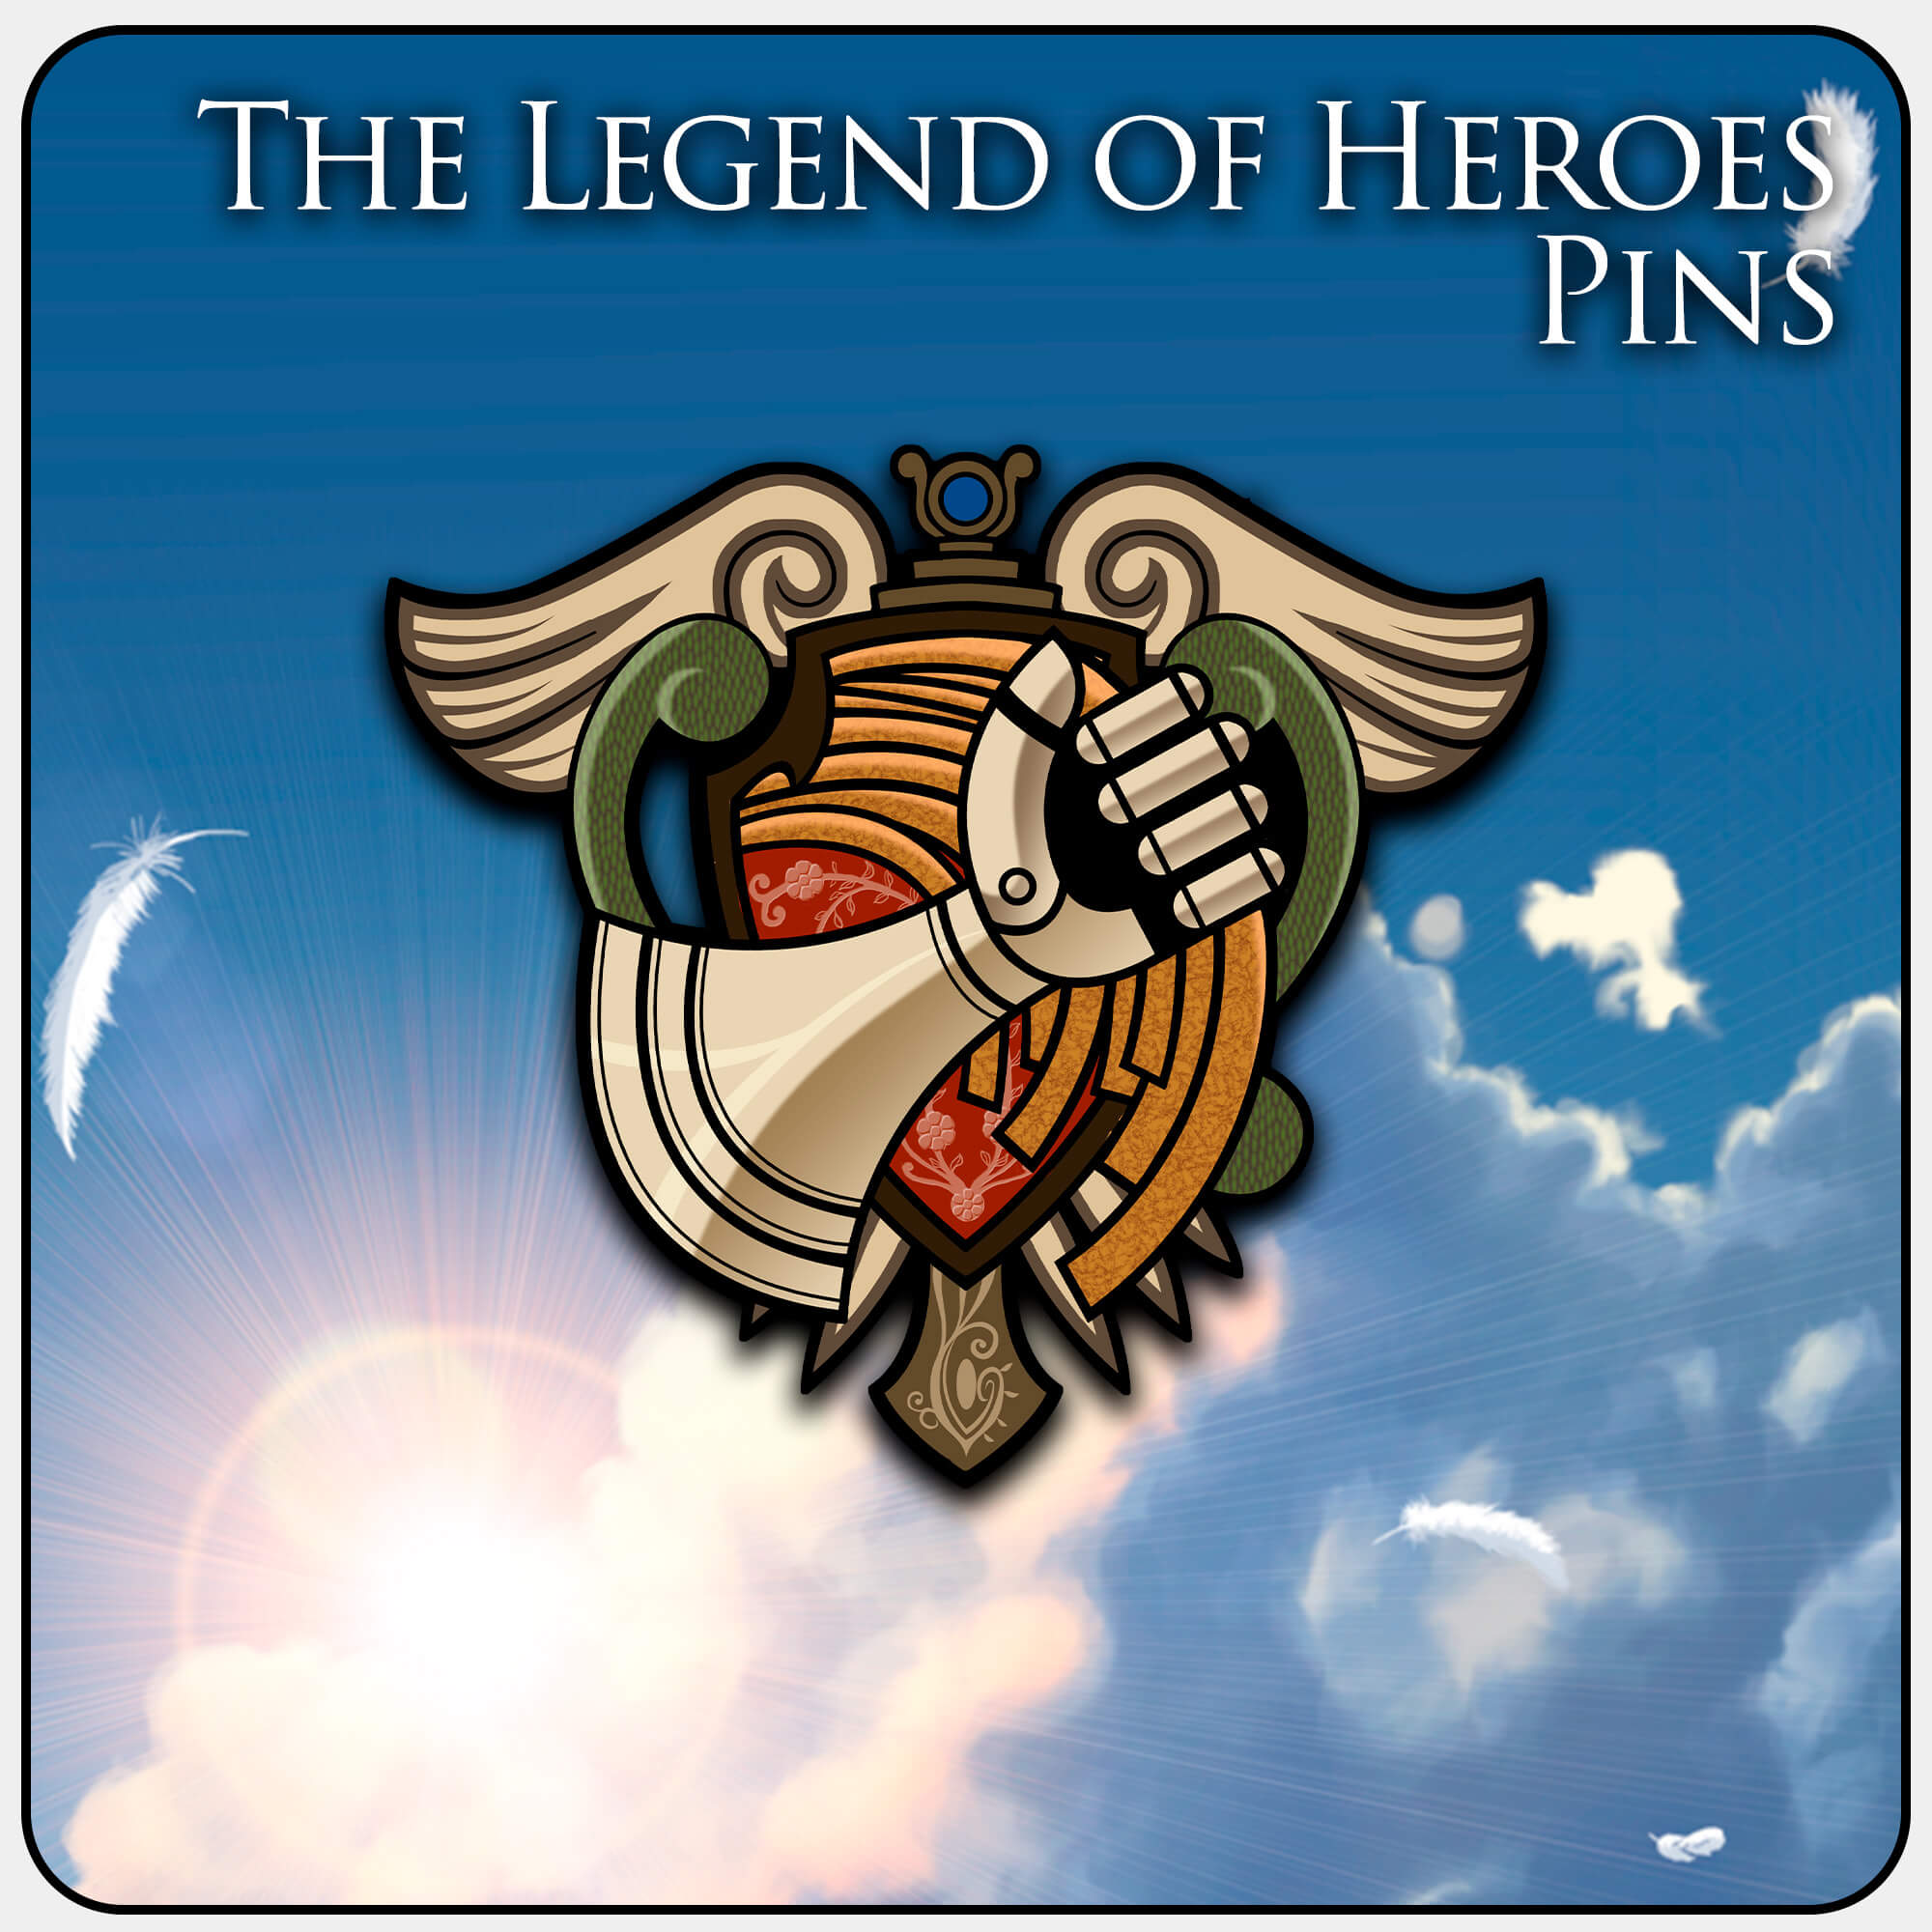 The Legend of Heroes Pins